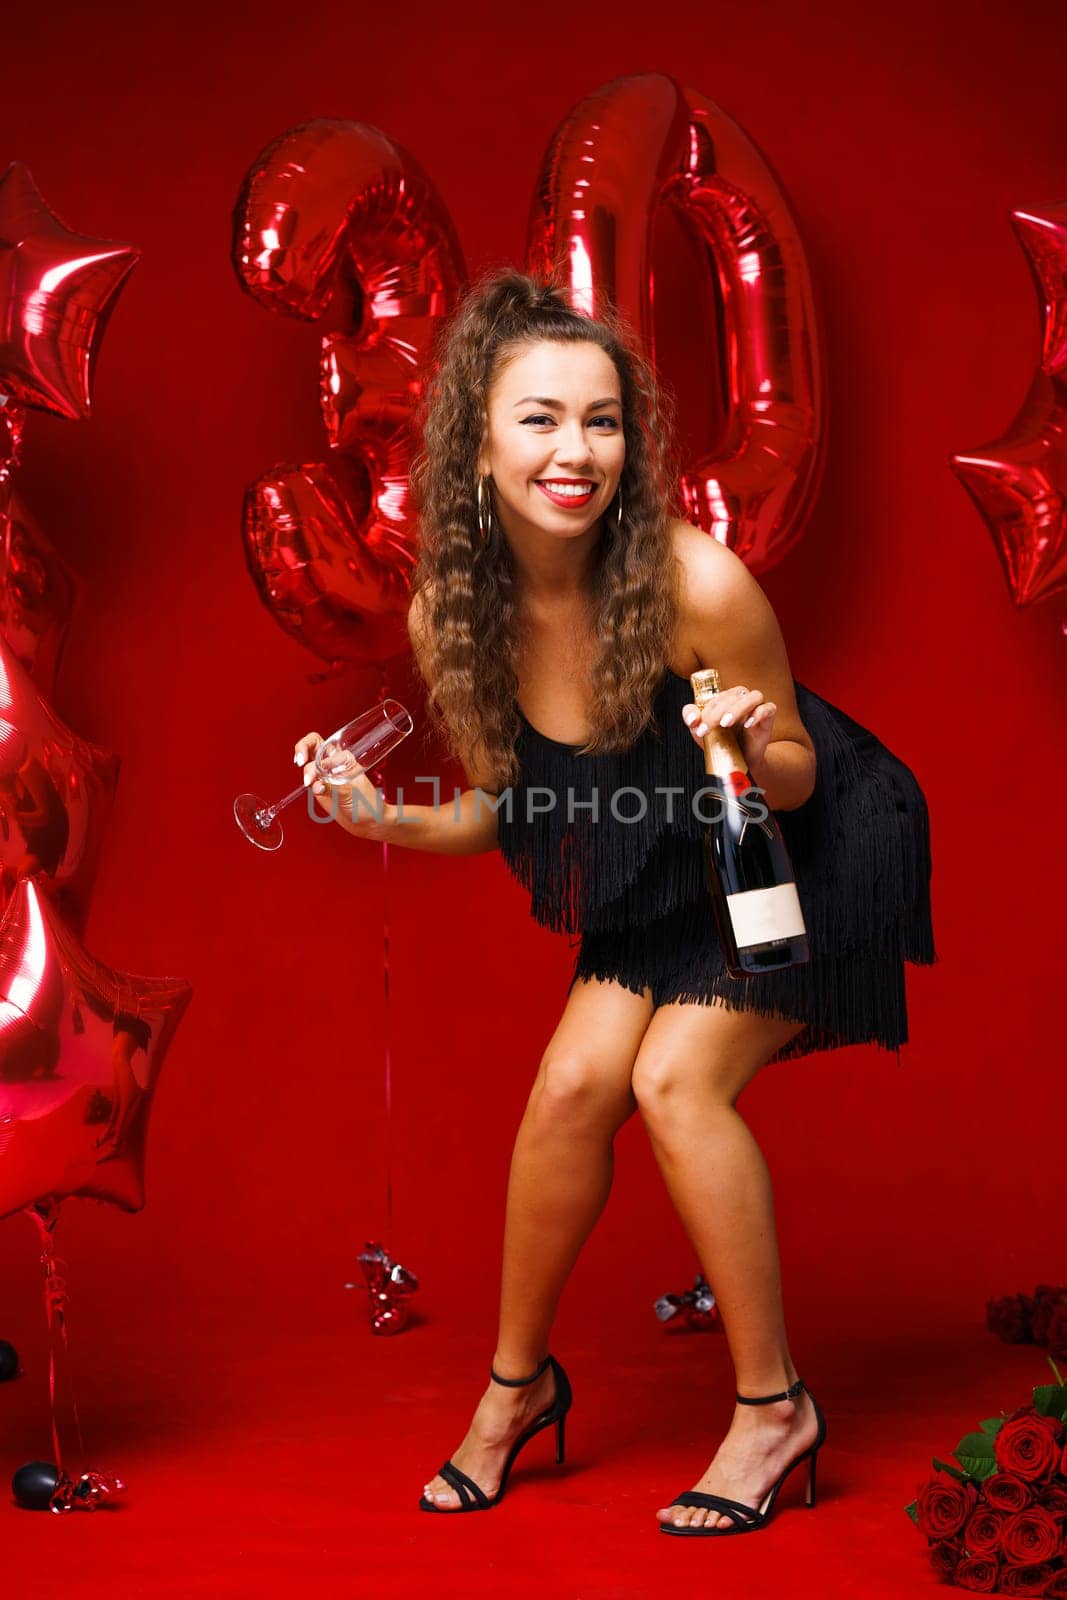 Beautiful woman posing on a red background with balloons by EkaterinaPereslavtseva